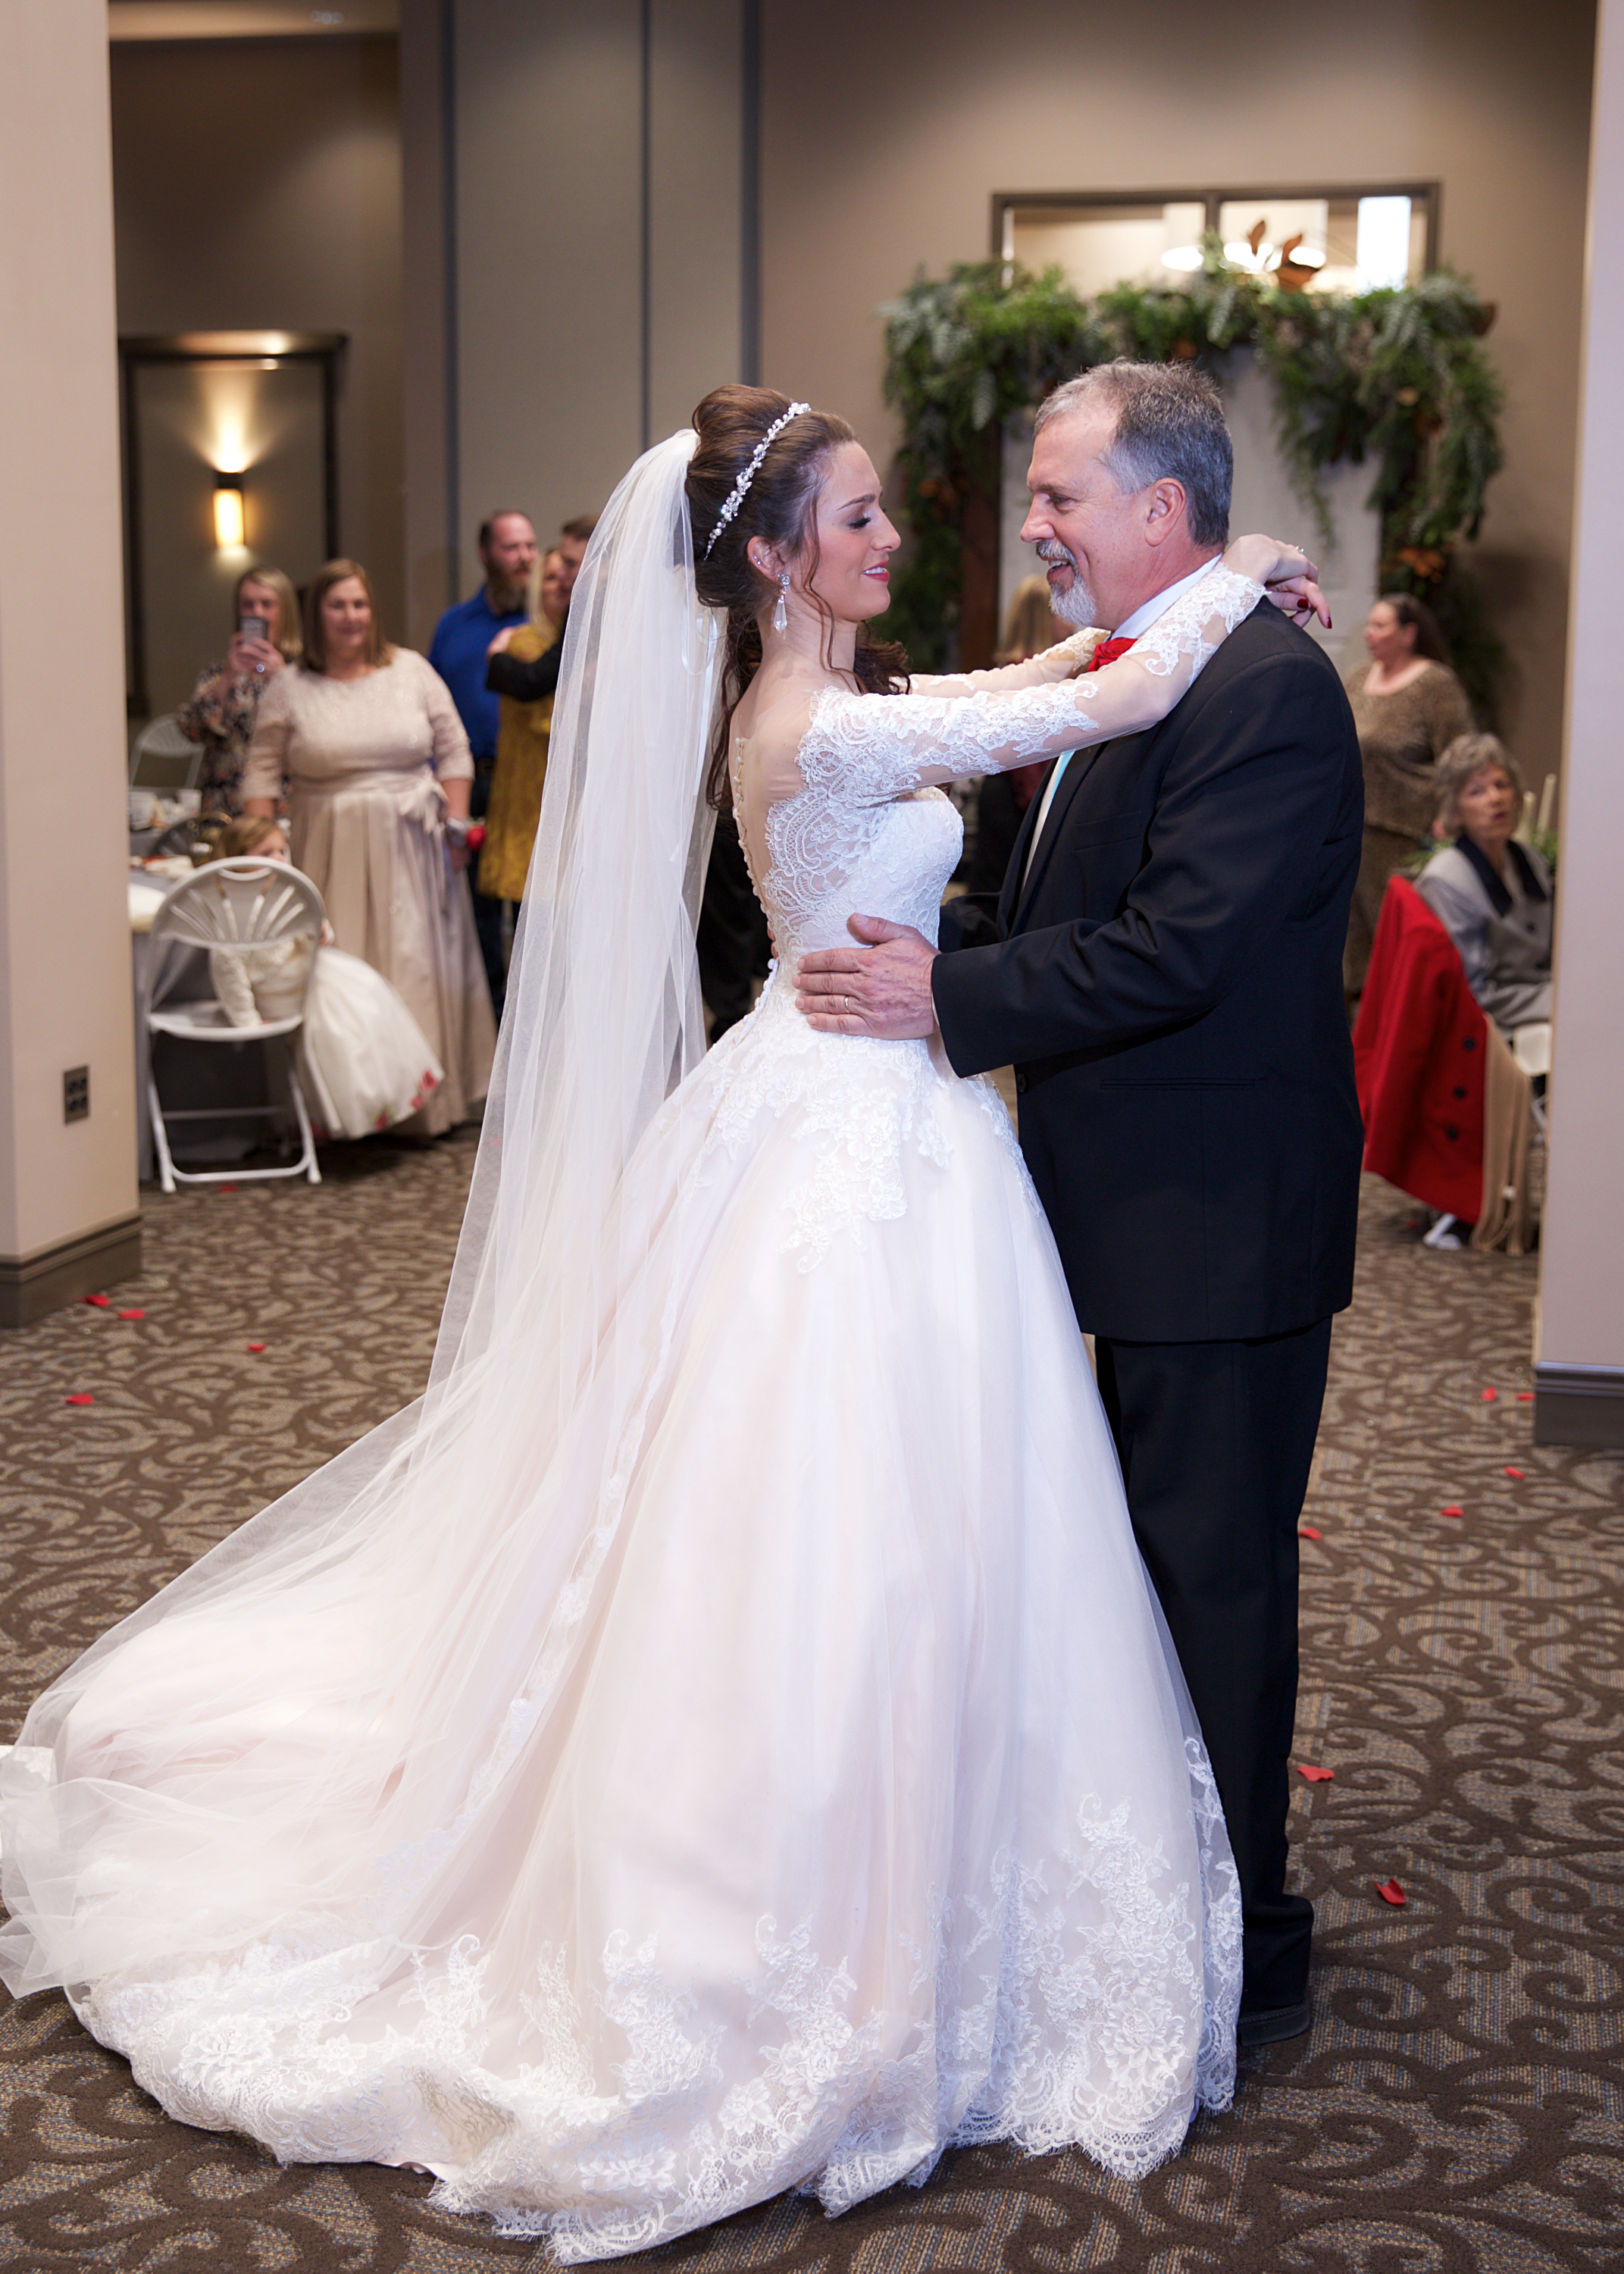 31-father-daughter-dance.jpg